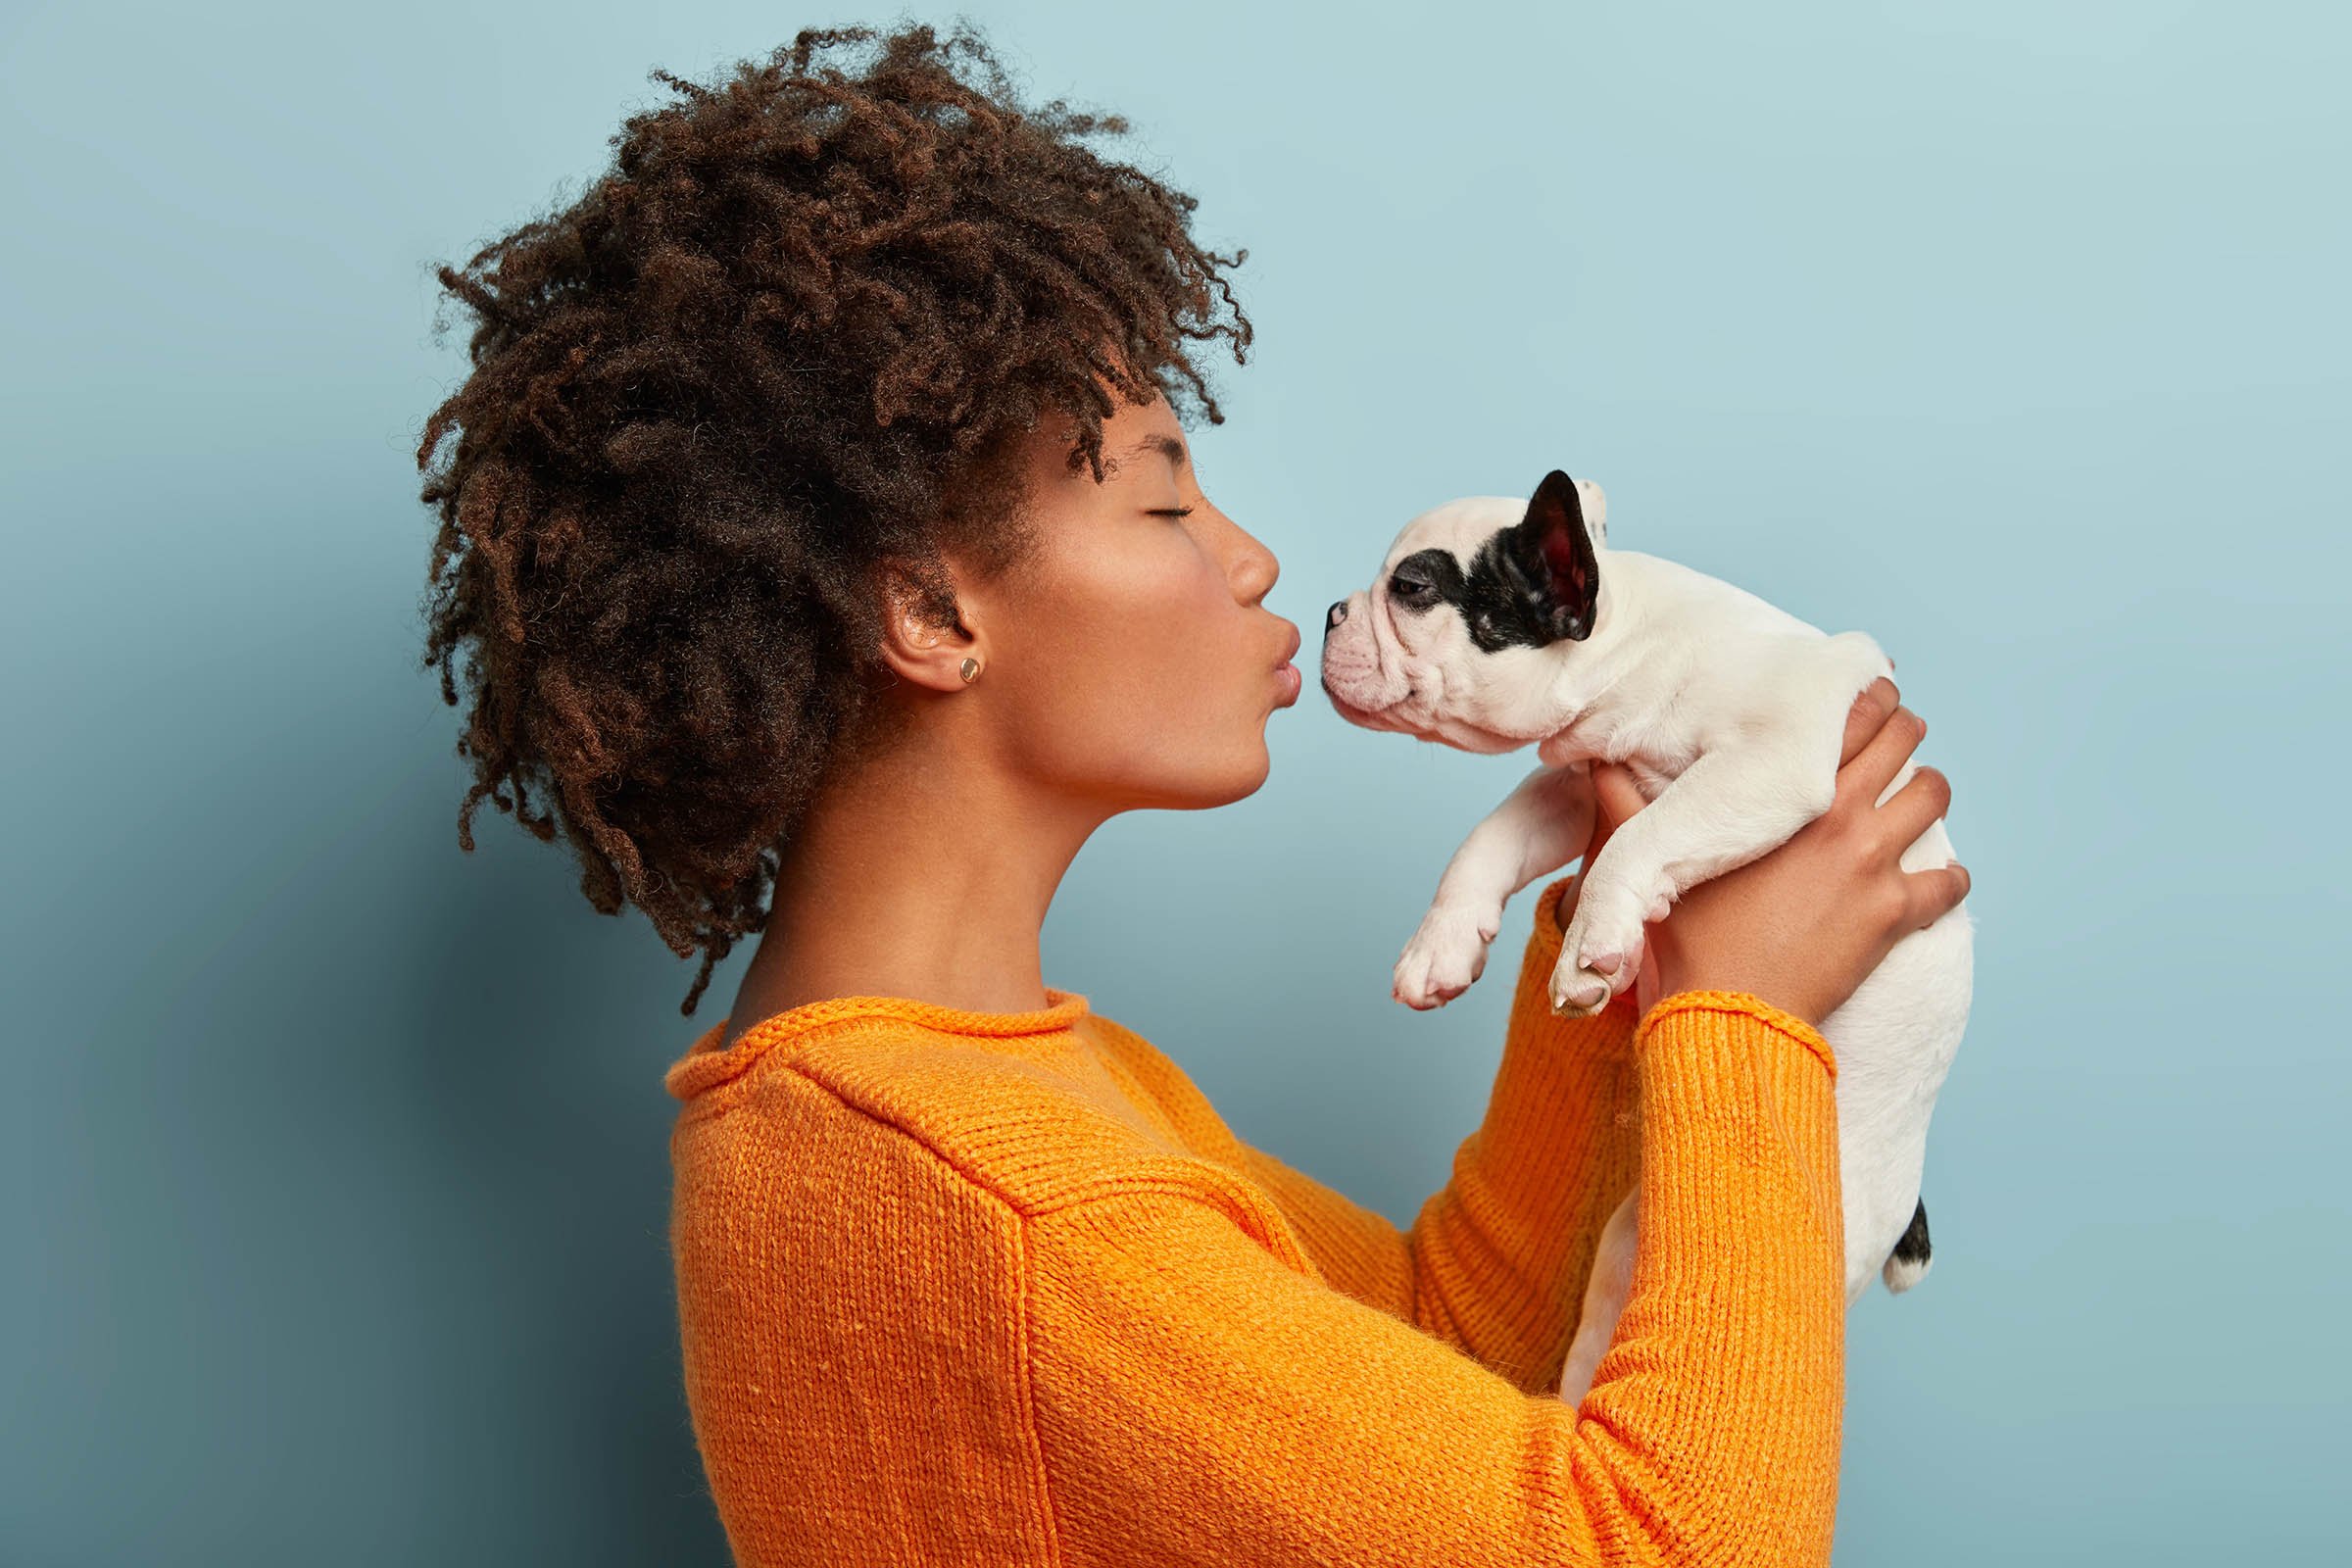 A woman holding up and about to kiss a puppy